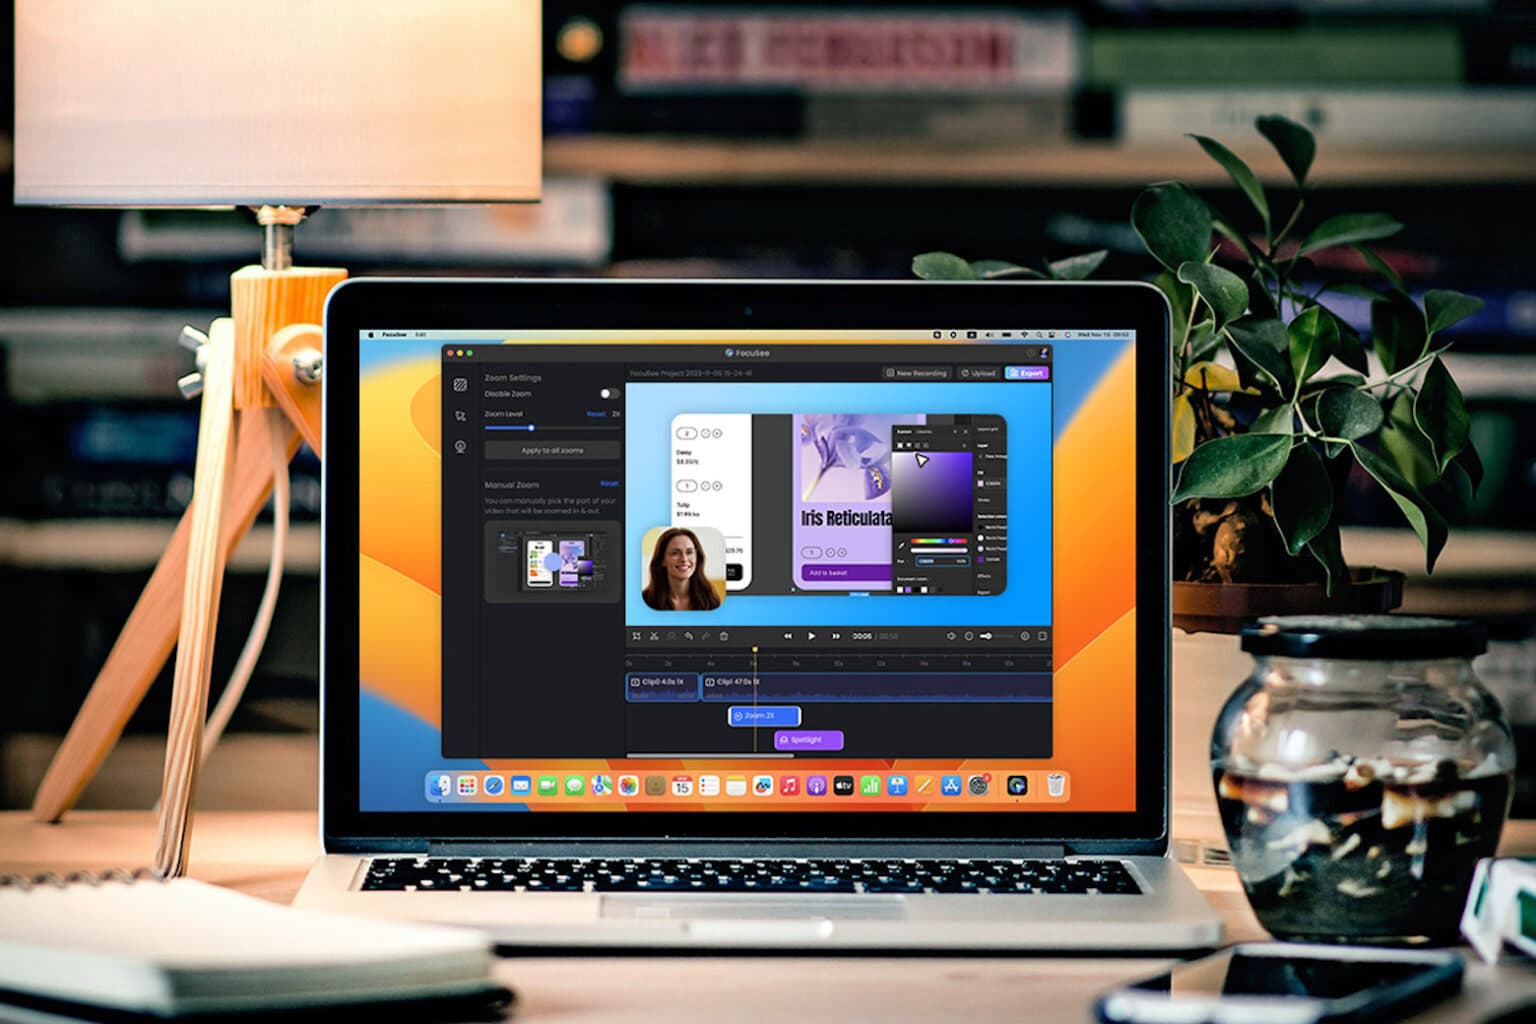 Get a lifetime subscription to FocuSee's automated editing power for $40.